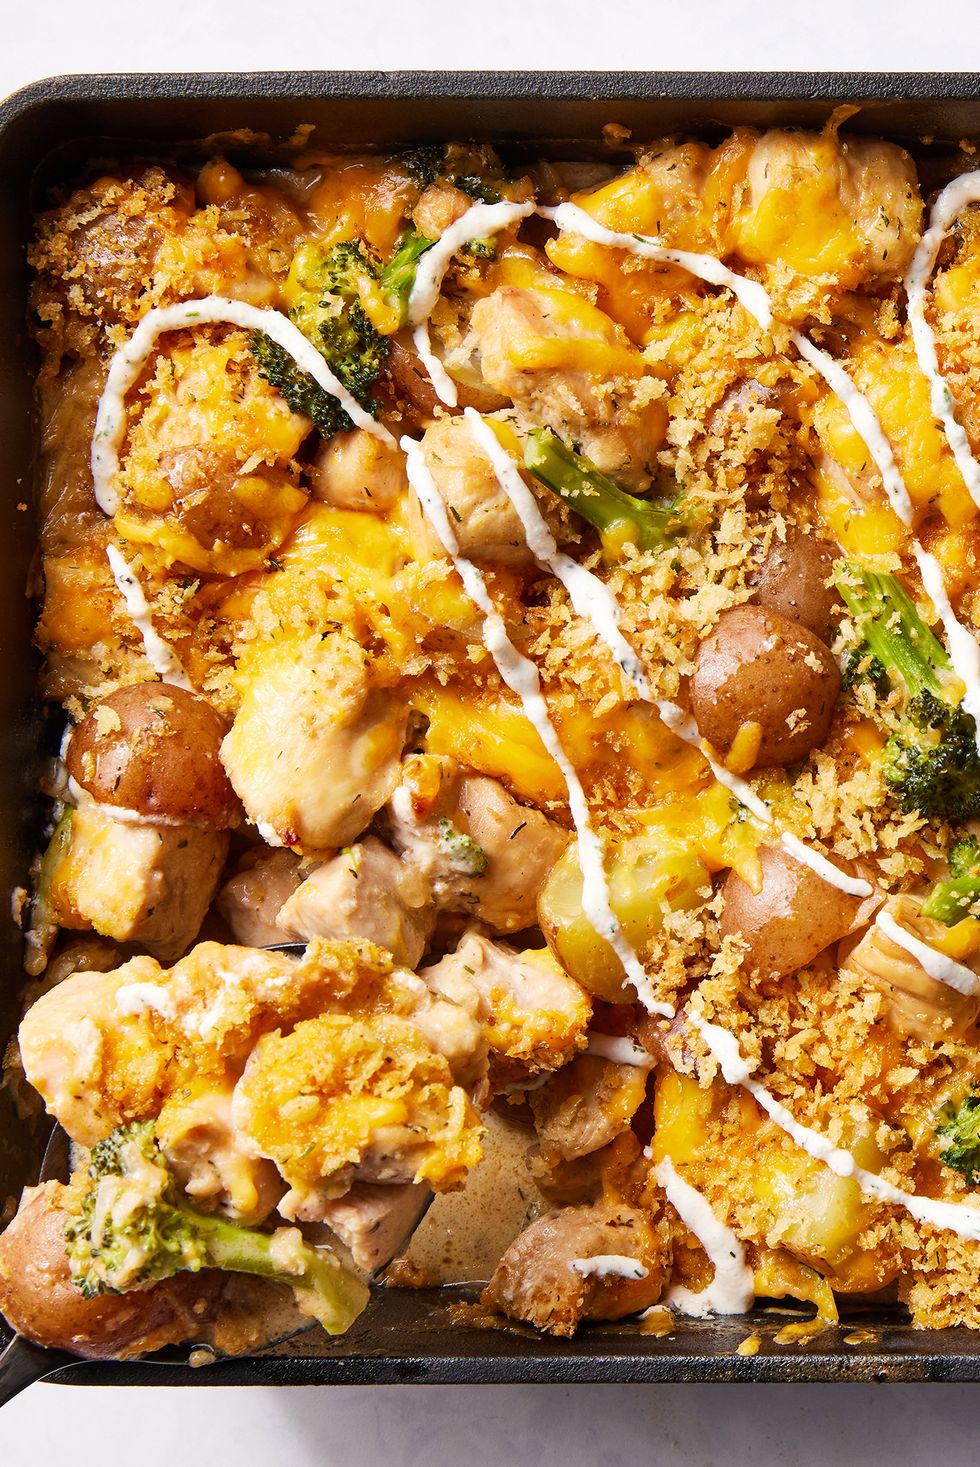 chicken with potatoes, broccoli, melted cheese, and drizzled with ranch in a casserole dish